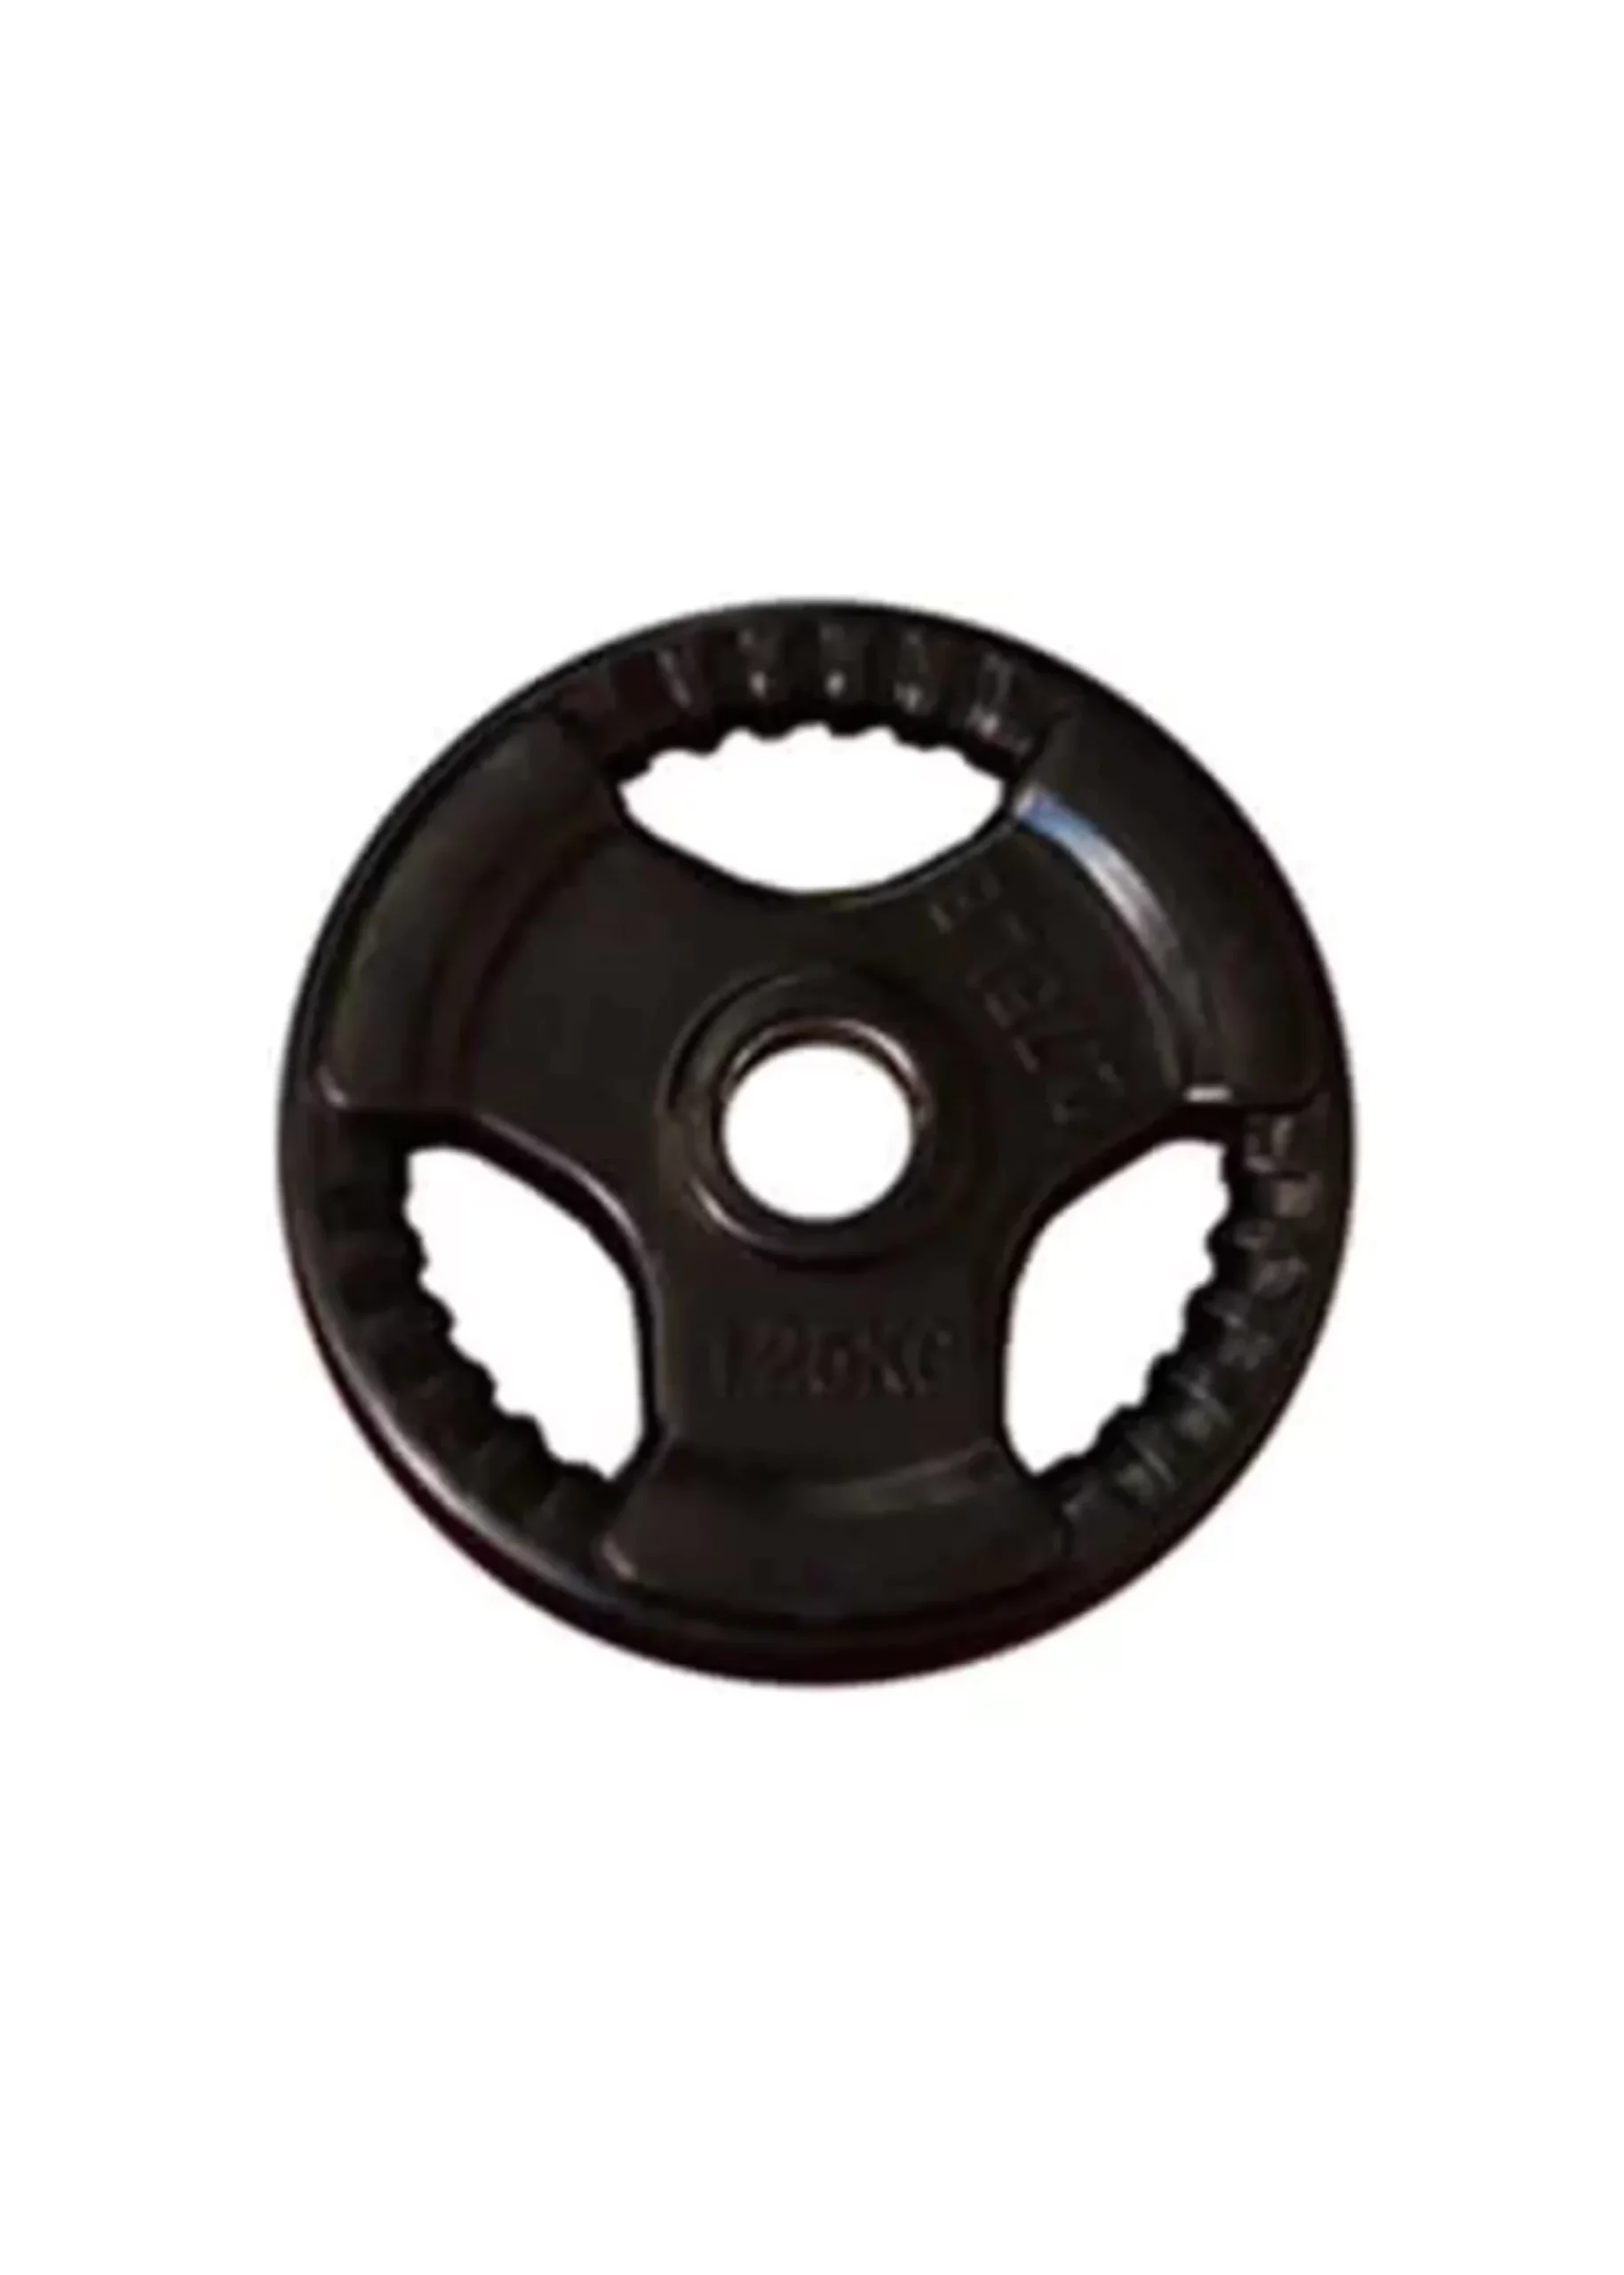 IRONBULL TRIPGRIP RUBBER COATED OLYMPIC PLATE